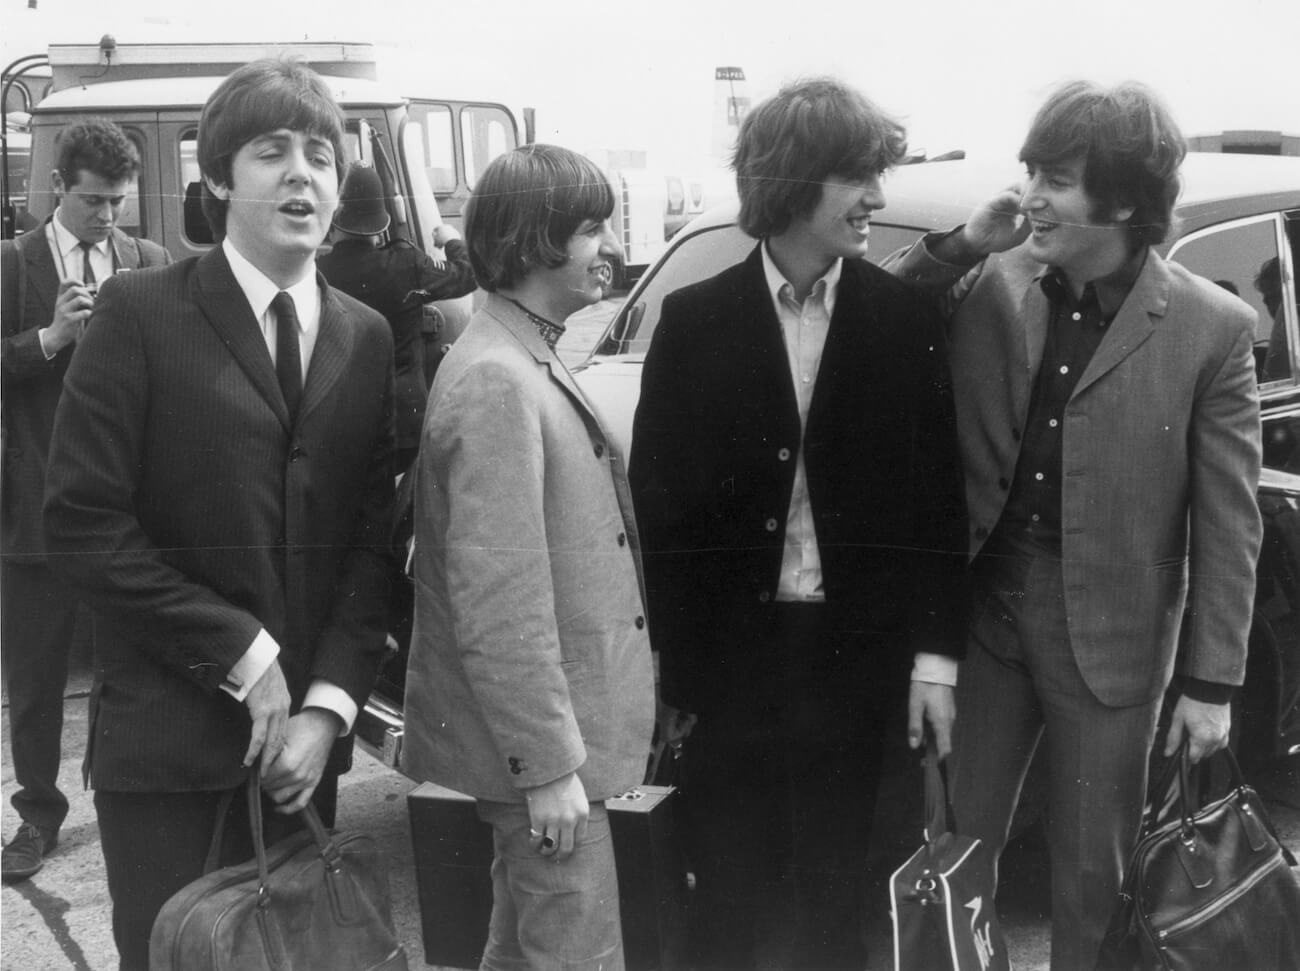 The Beatles, who were inspired by Fred Astaire, embarking on their second tour of the U.S. in 1965.